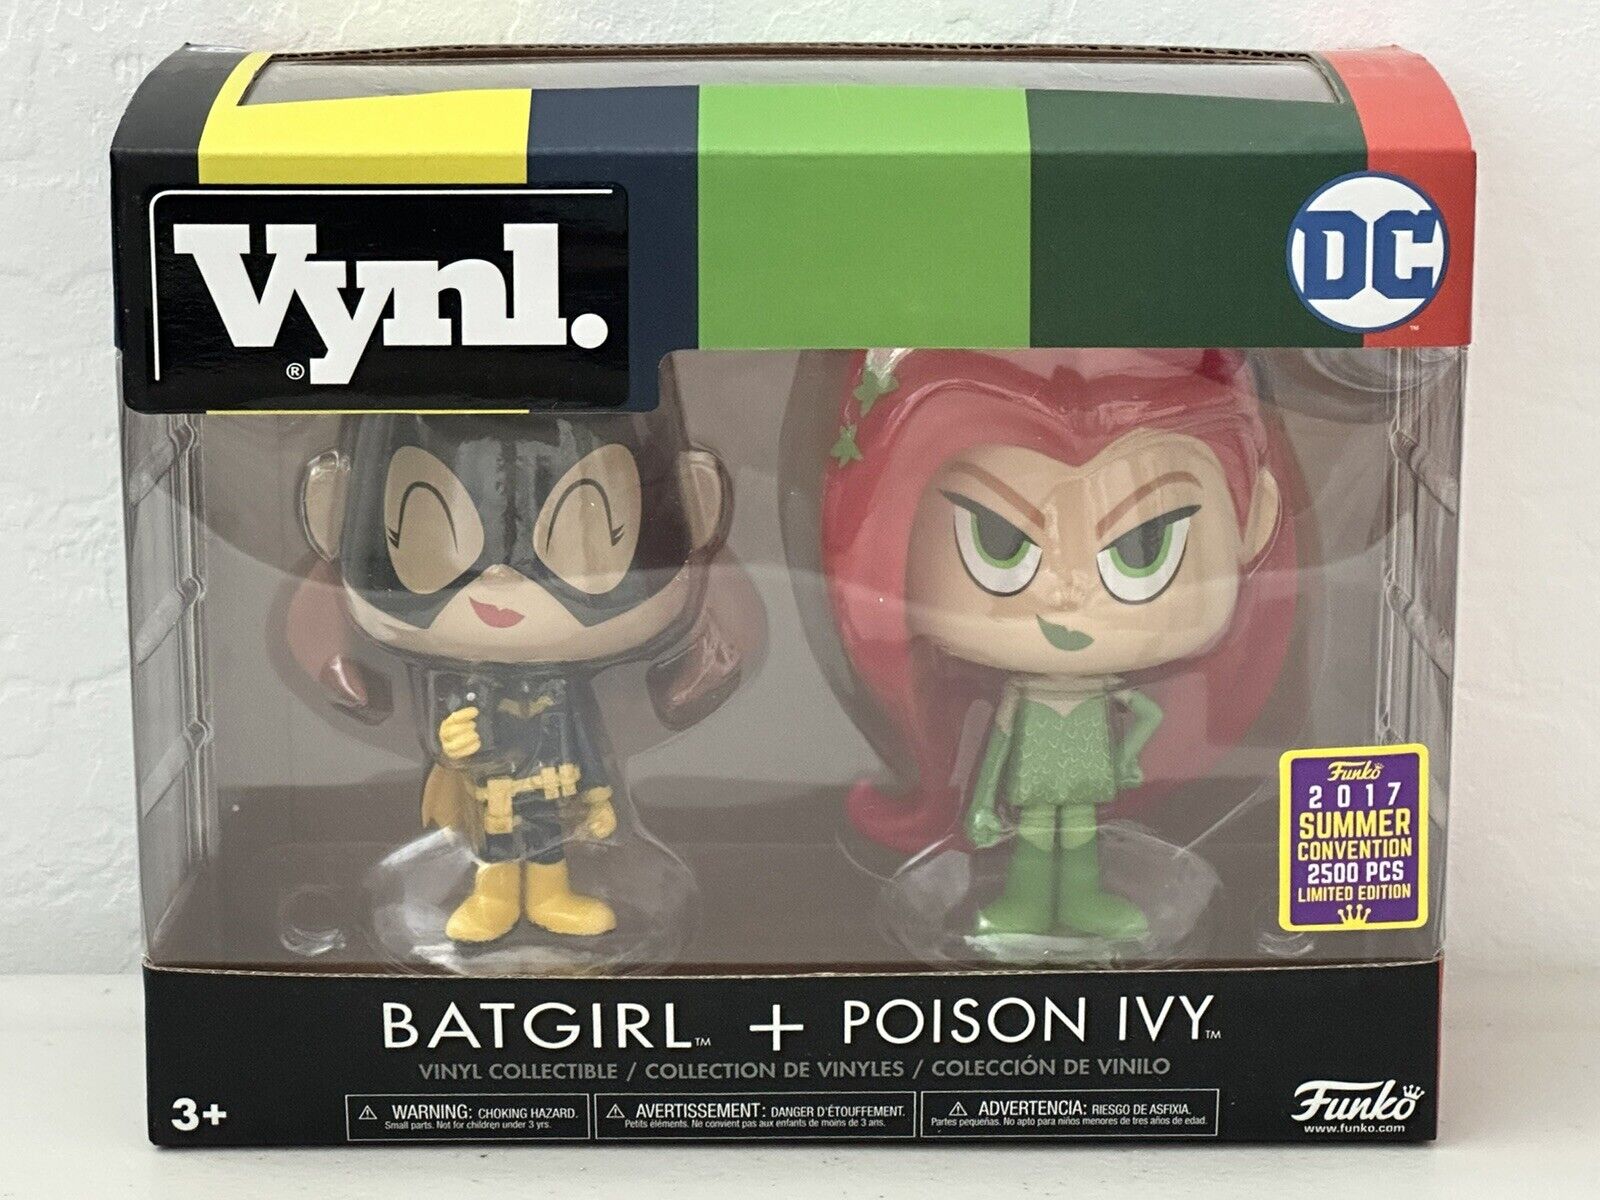 Funko VYNL DC Batgirl and Poison Ivy 2017 Summer Convention Vinyl Figure